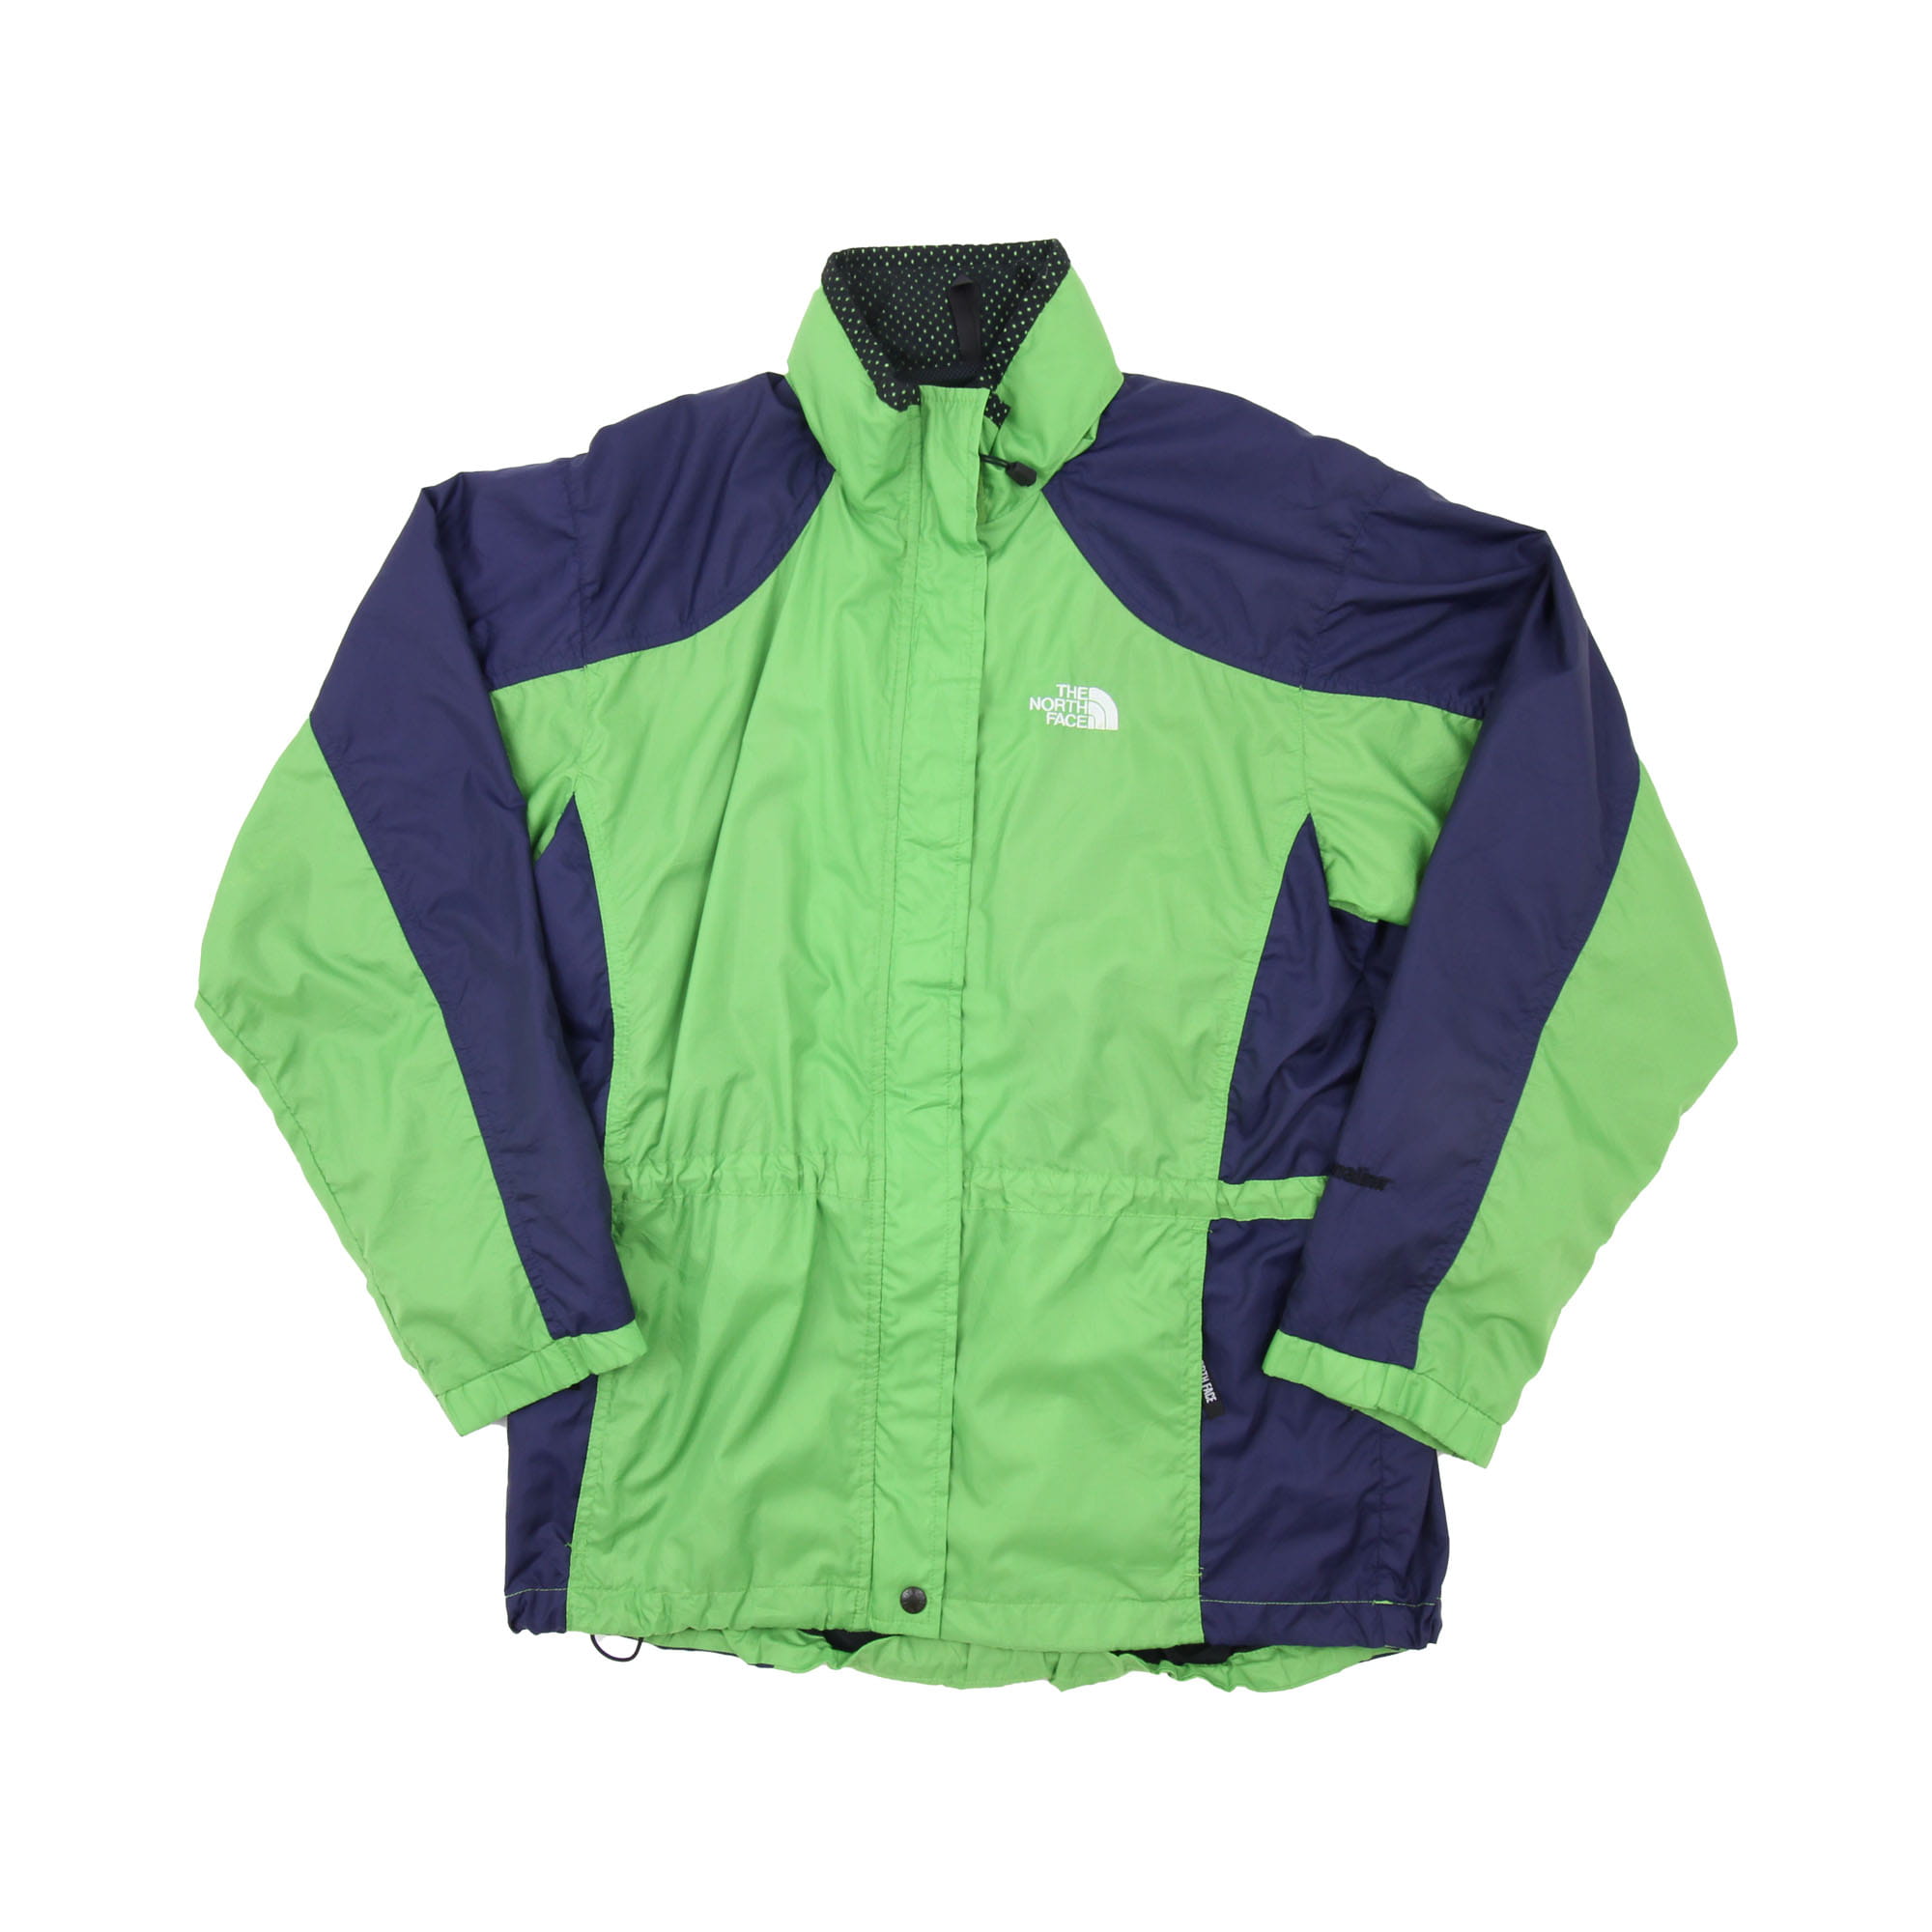 The North Face Hydrenaline Wind Jacket Green -  L